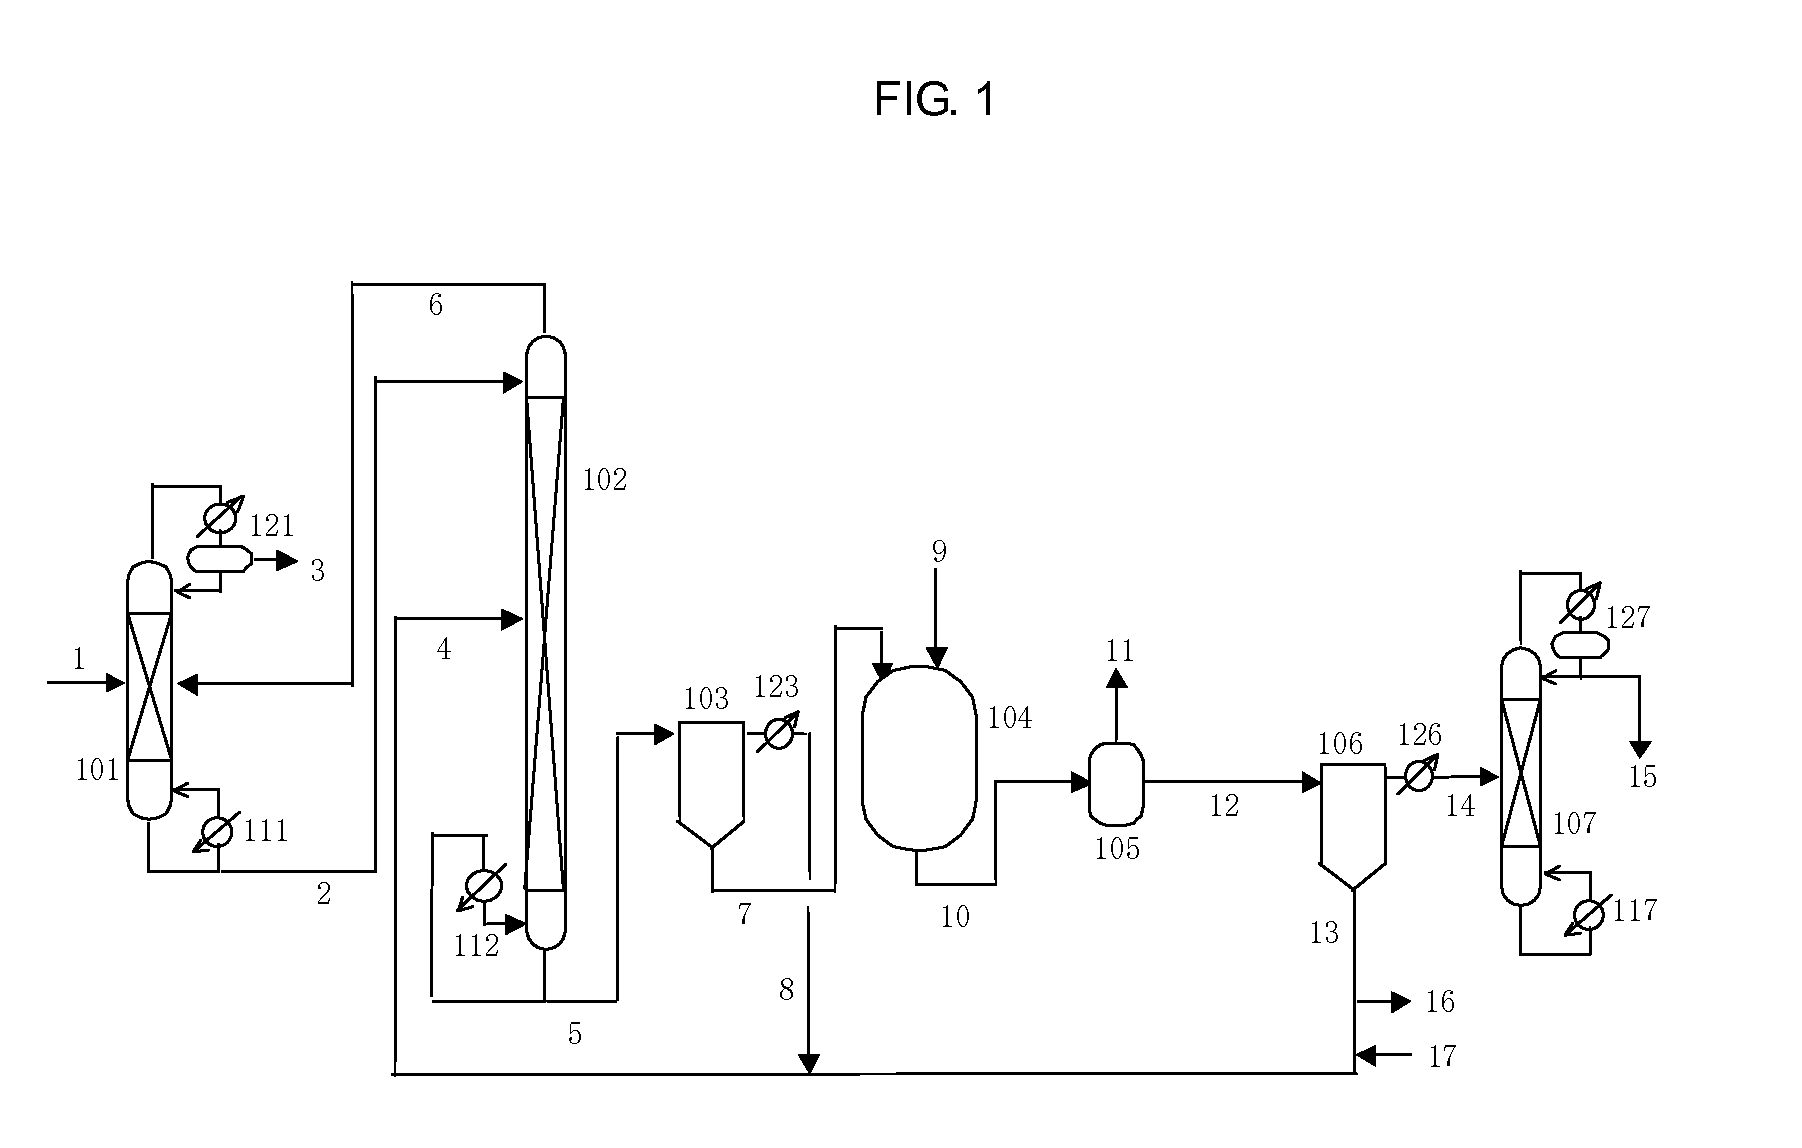 Process for producing isocyanates using diaryl carbonate